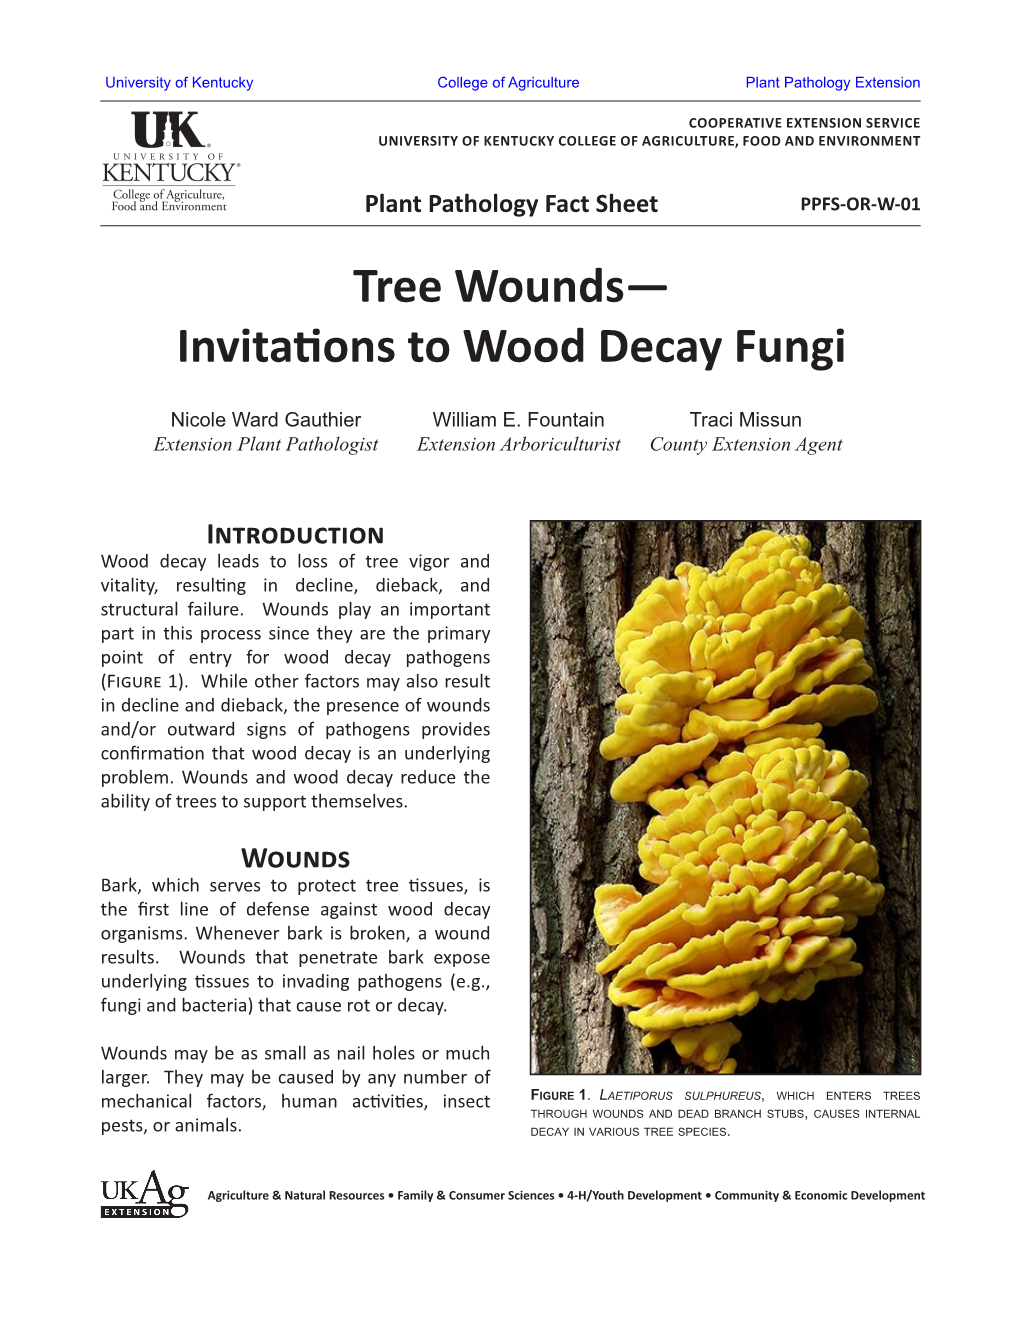 Tree Wounds— Invitations to Wood Decay Fungi